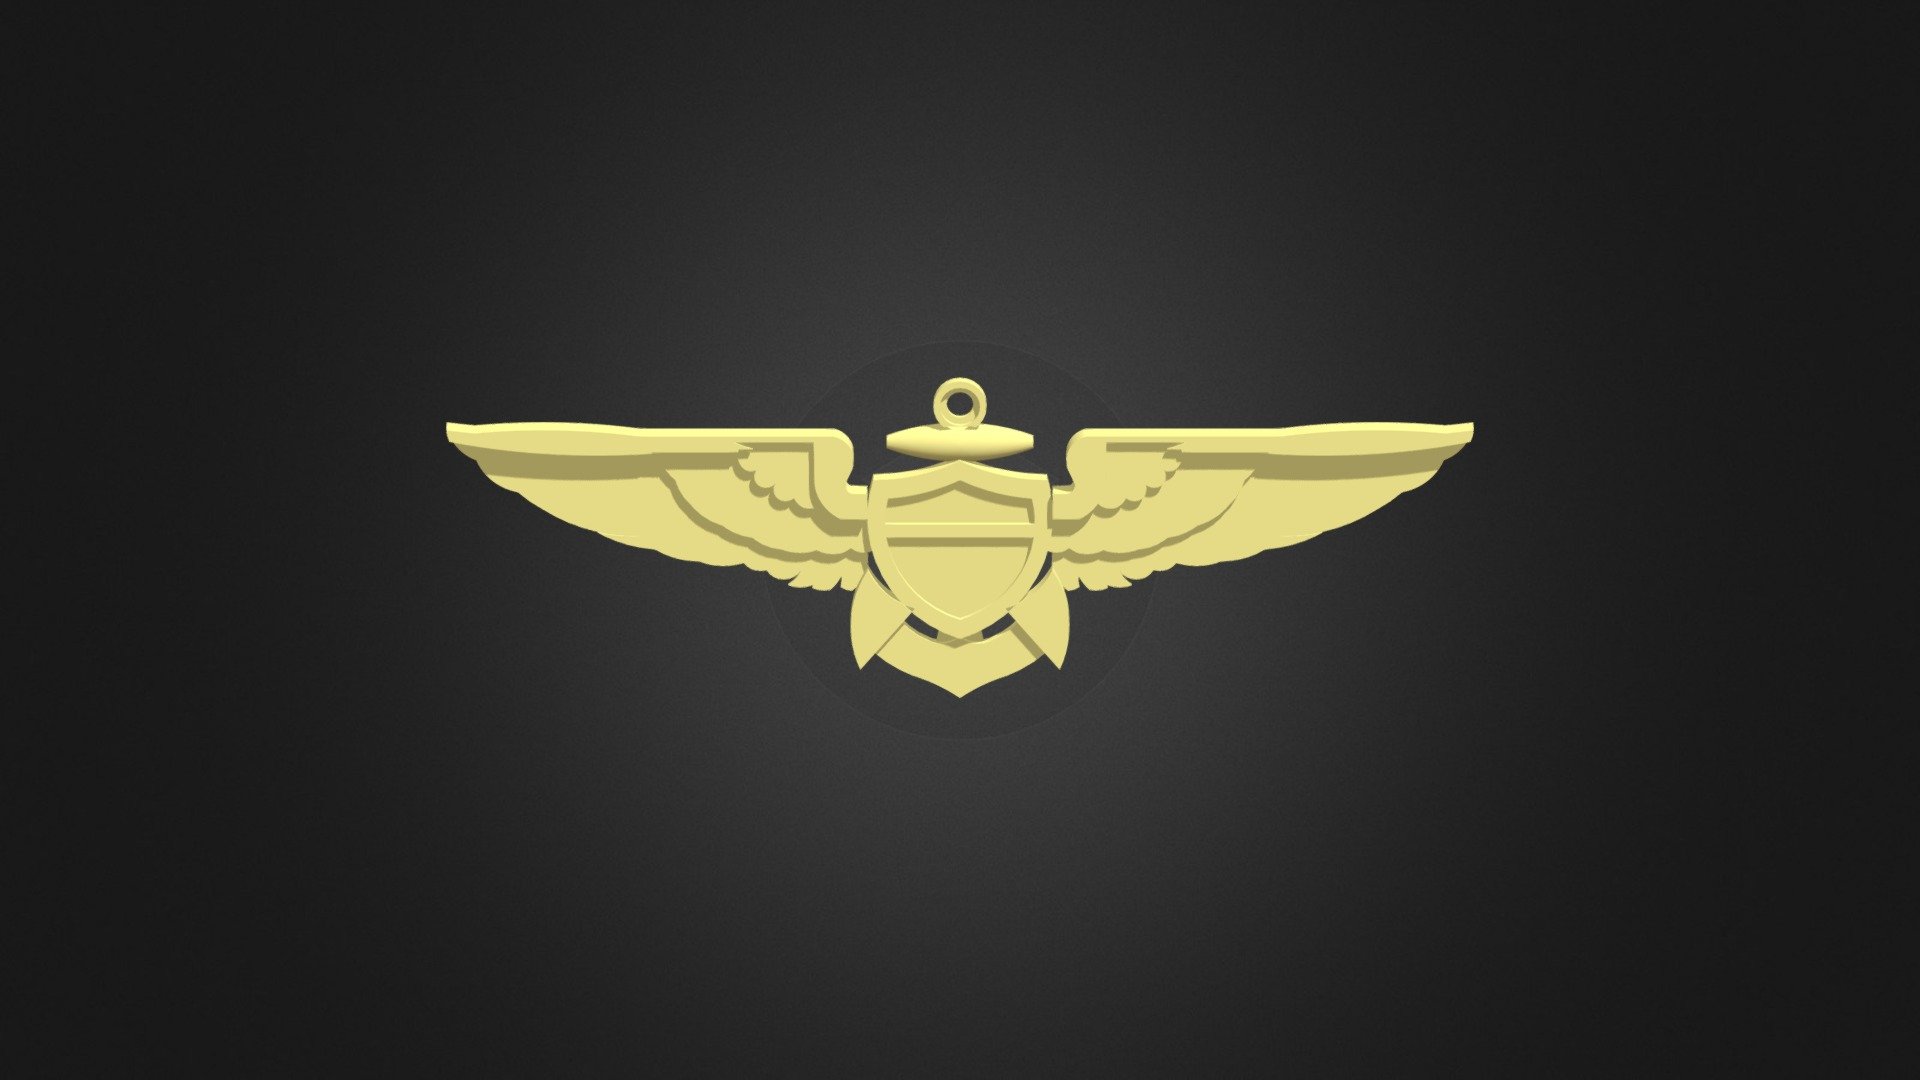 The badge of the pilots from the movie Top Gun with Tom Cruise 3d model